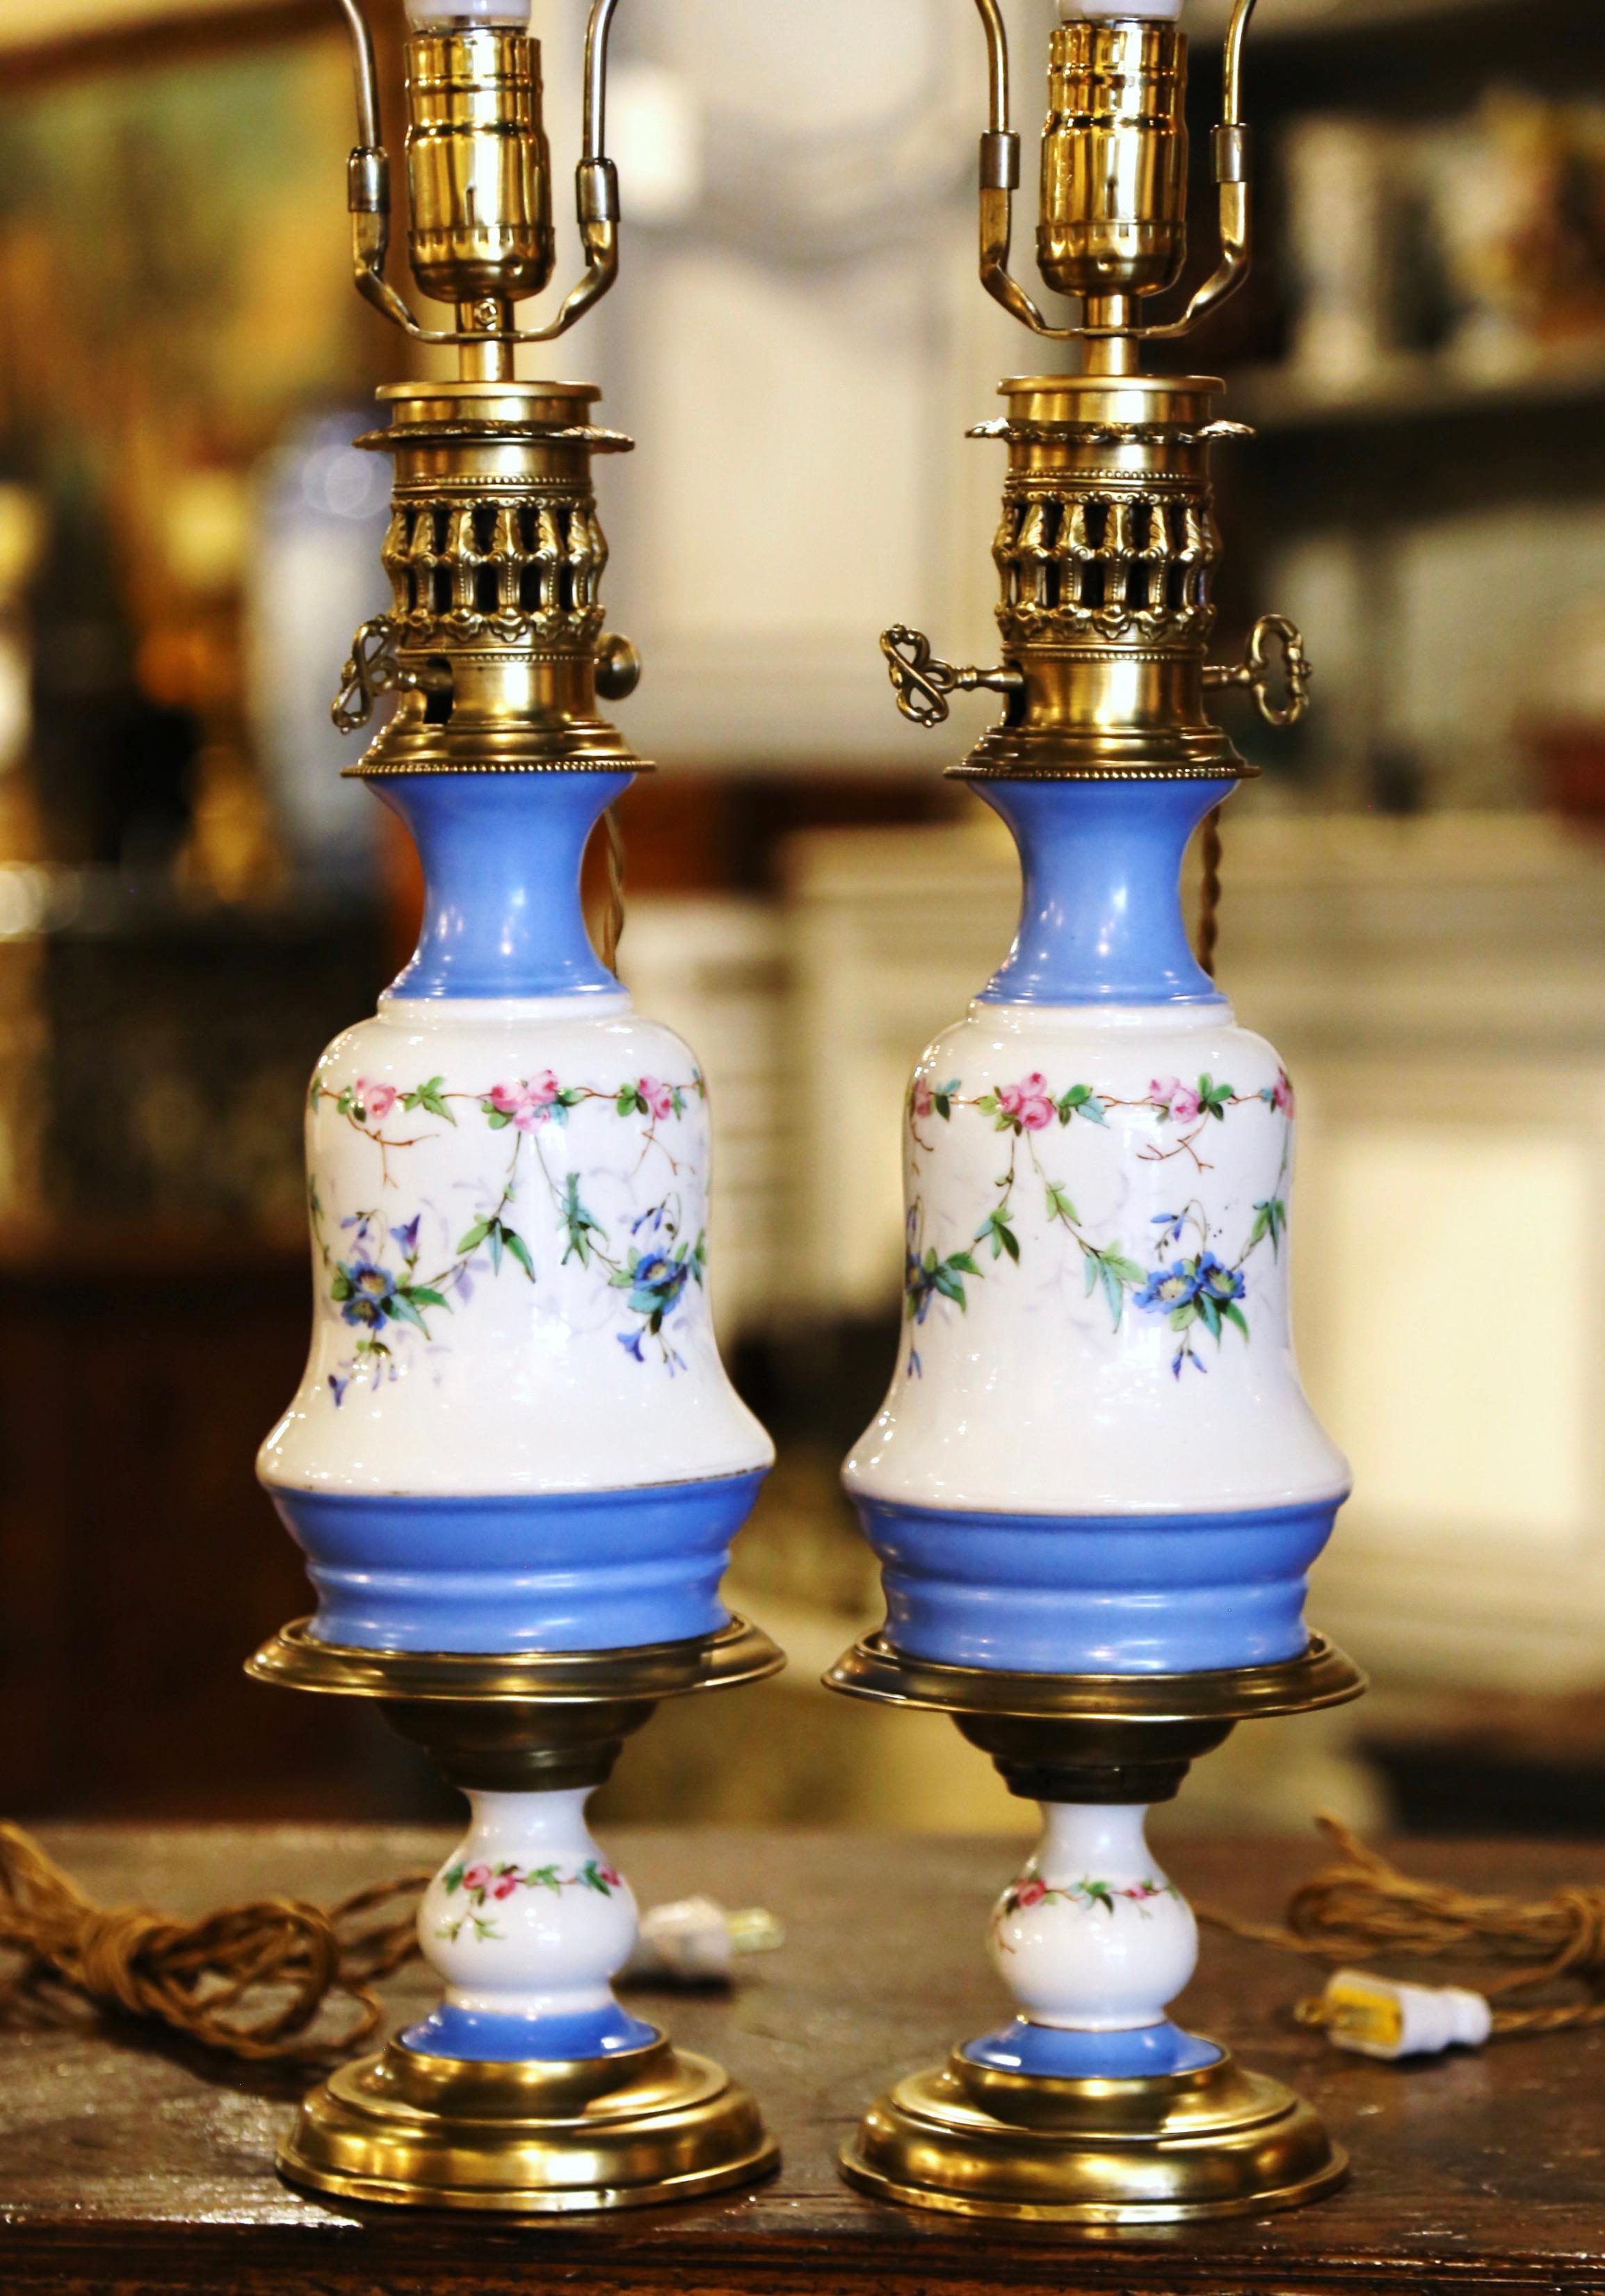 Pair of 19th Century French Porcelain & Brass Table Oil Lamps with Floral Motif For Sale 5